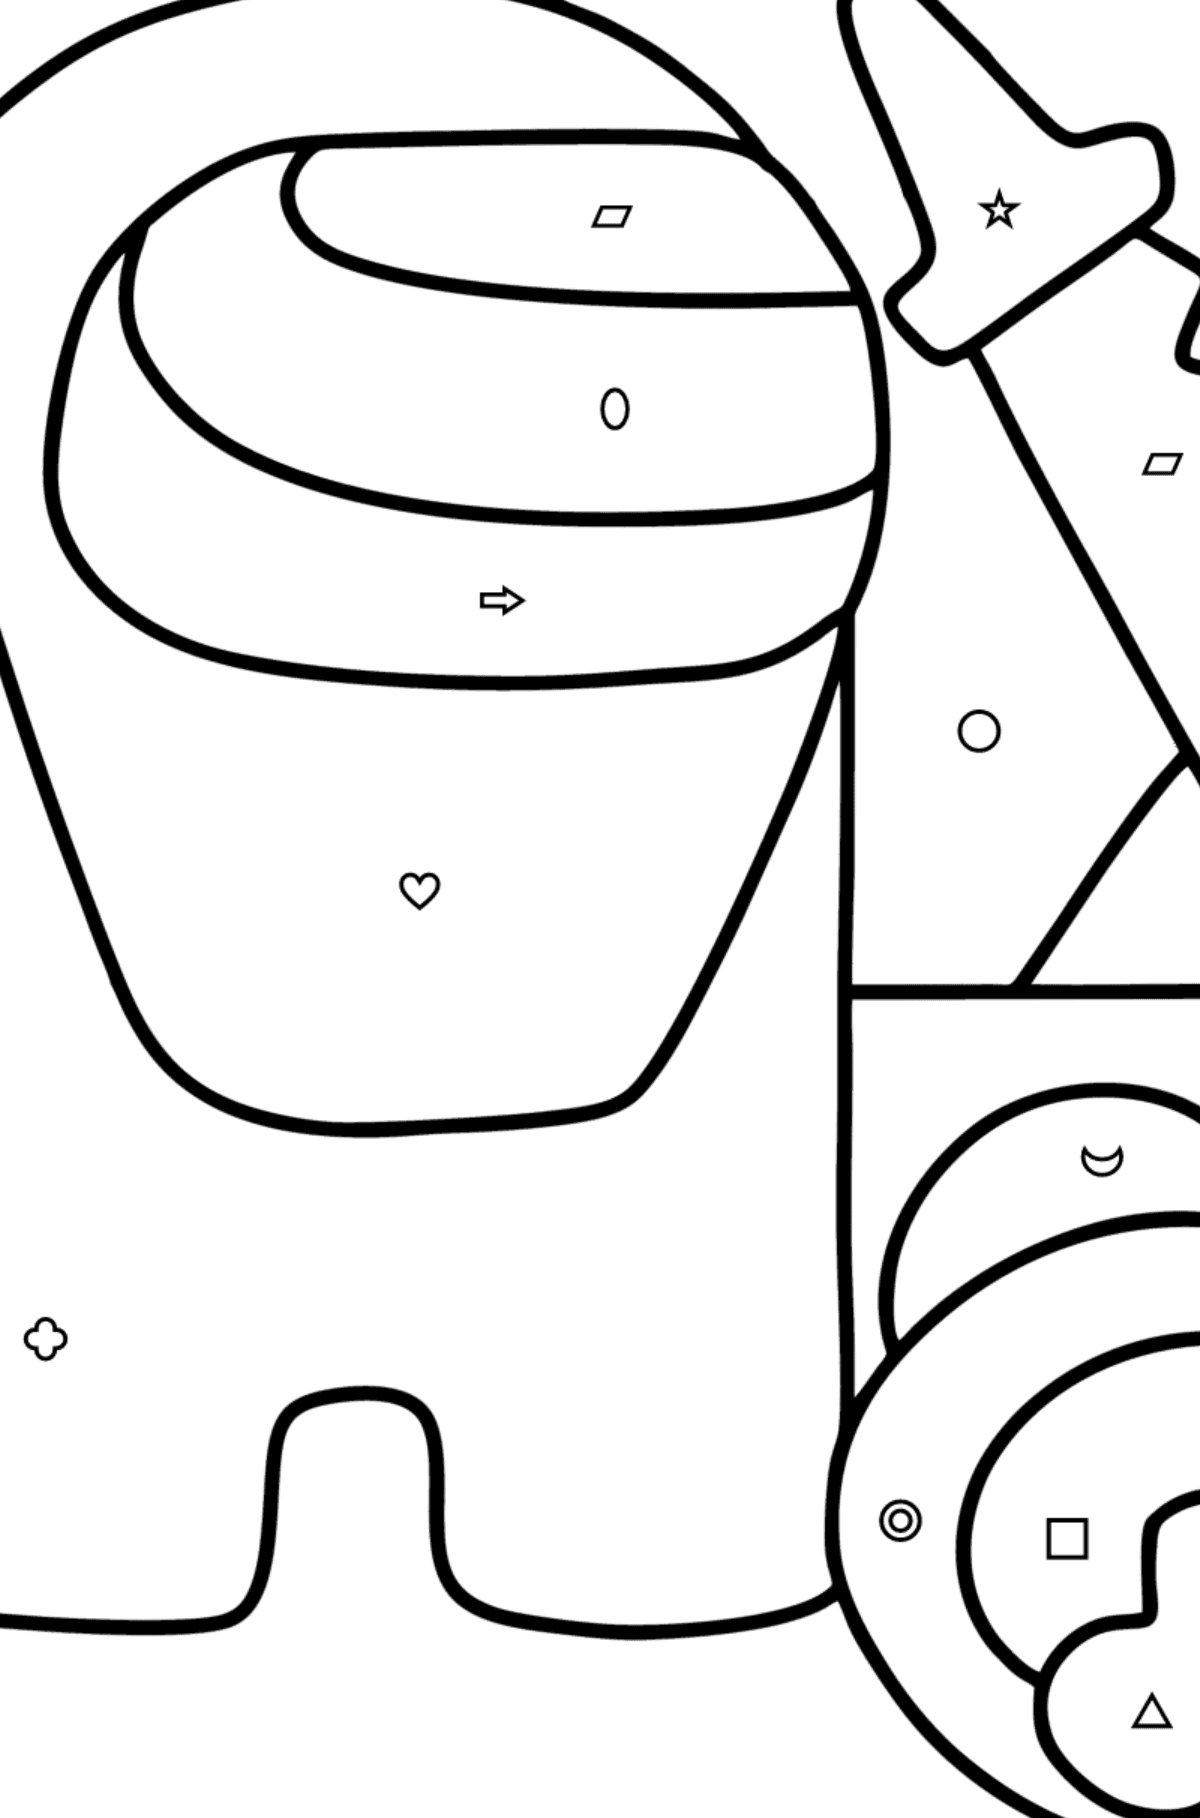 Among As with a Knife coloring page - Coloring by Geometric Shapes for Kids